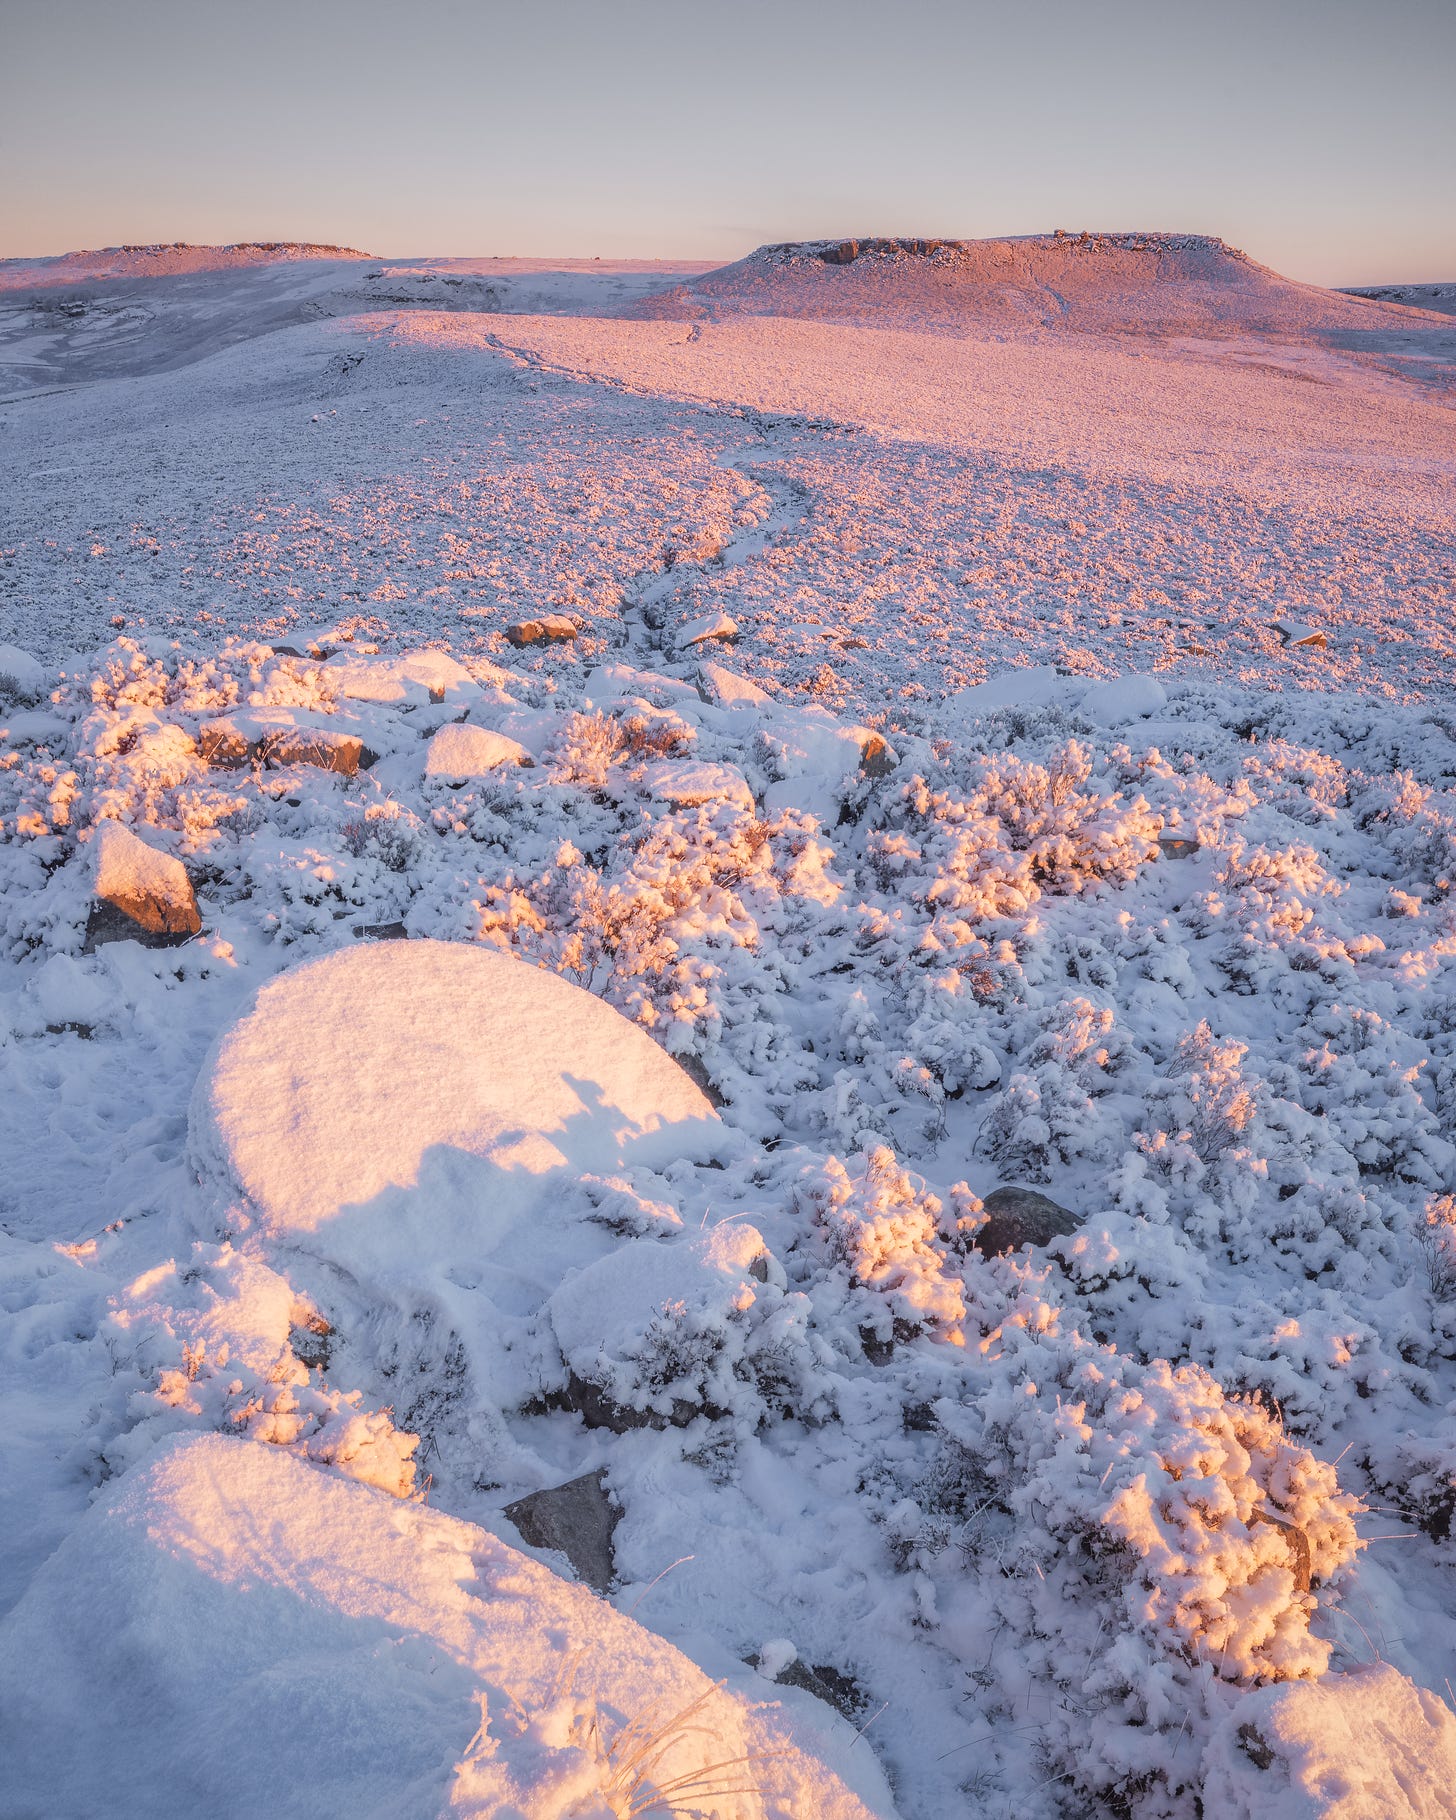 A snowy landscape from the peak district, the light of the rising sun is turning the snow pink